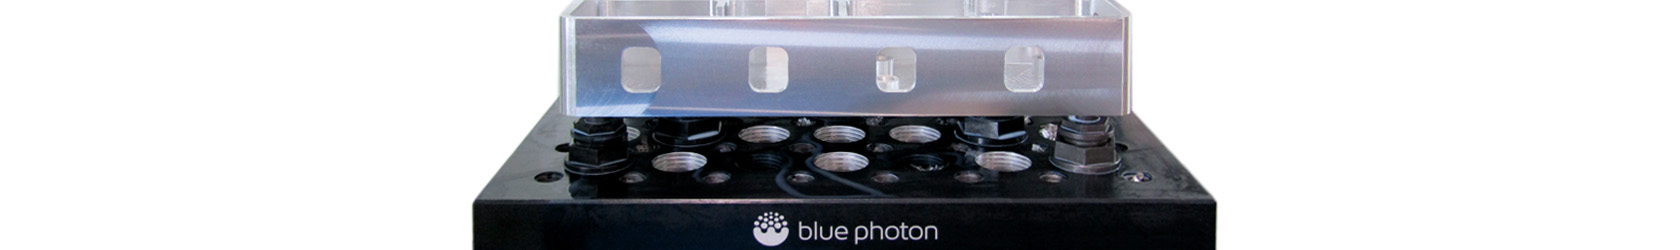 Photo of a Blue Photon gripper head, part of their workholding system